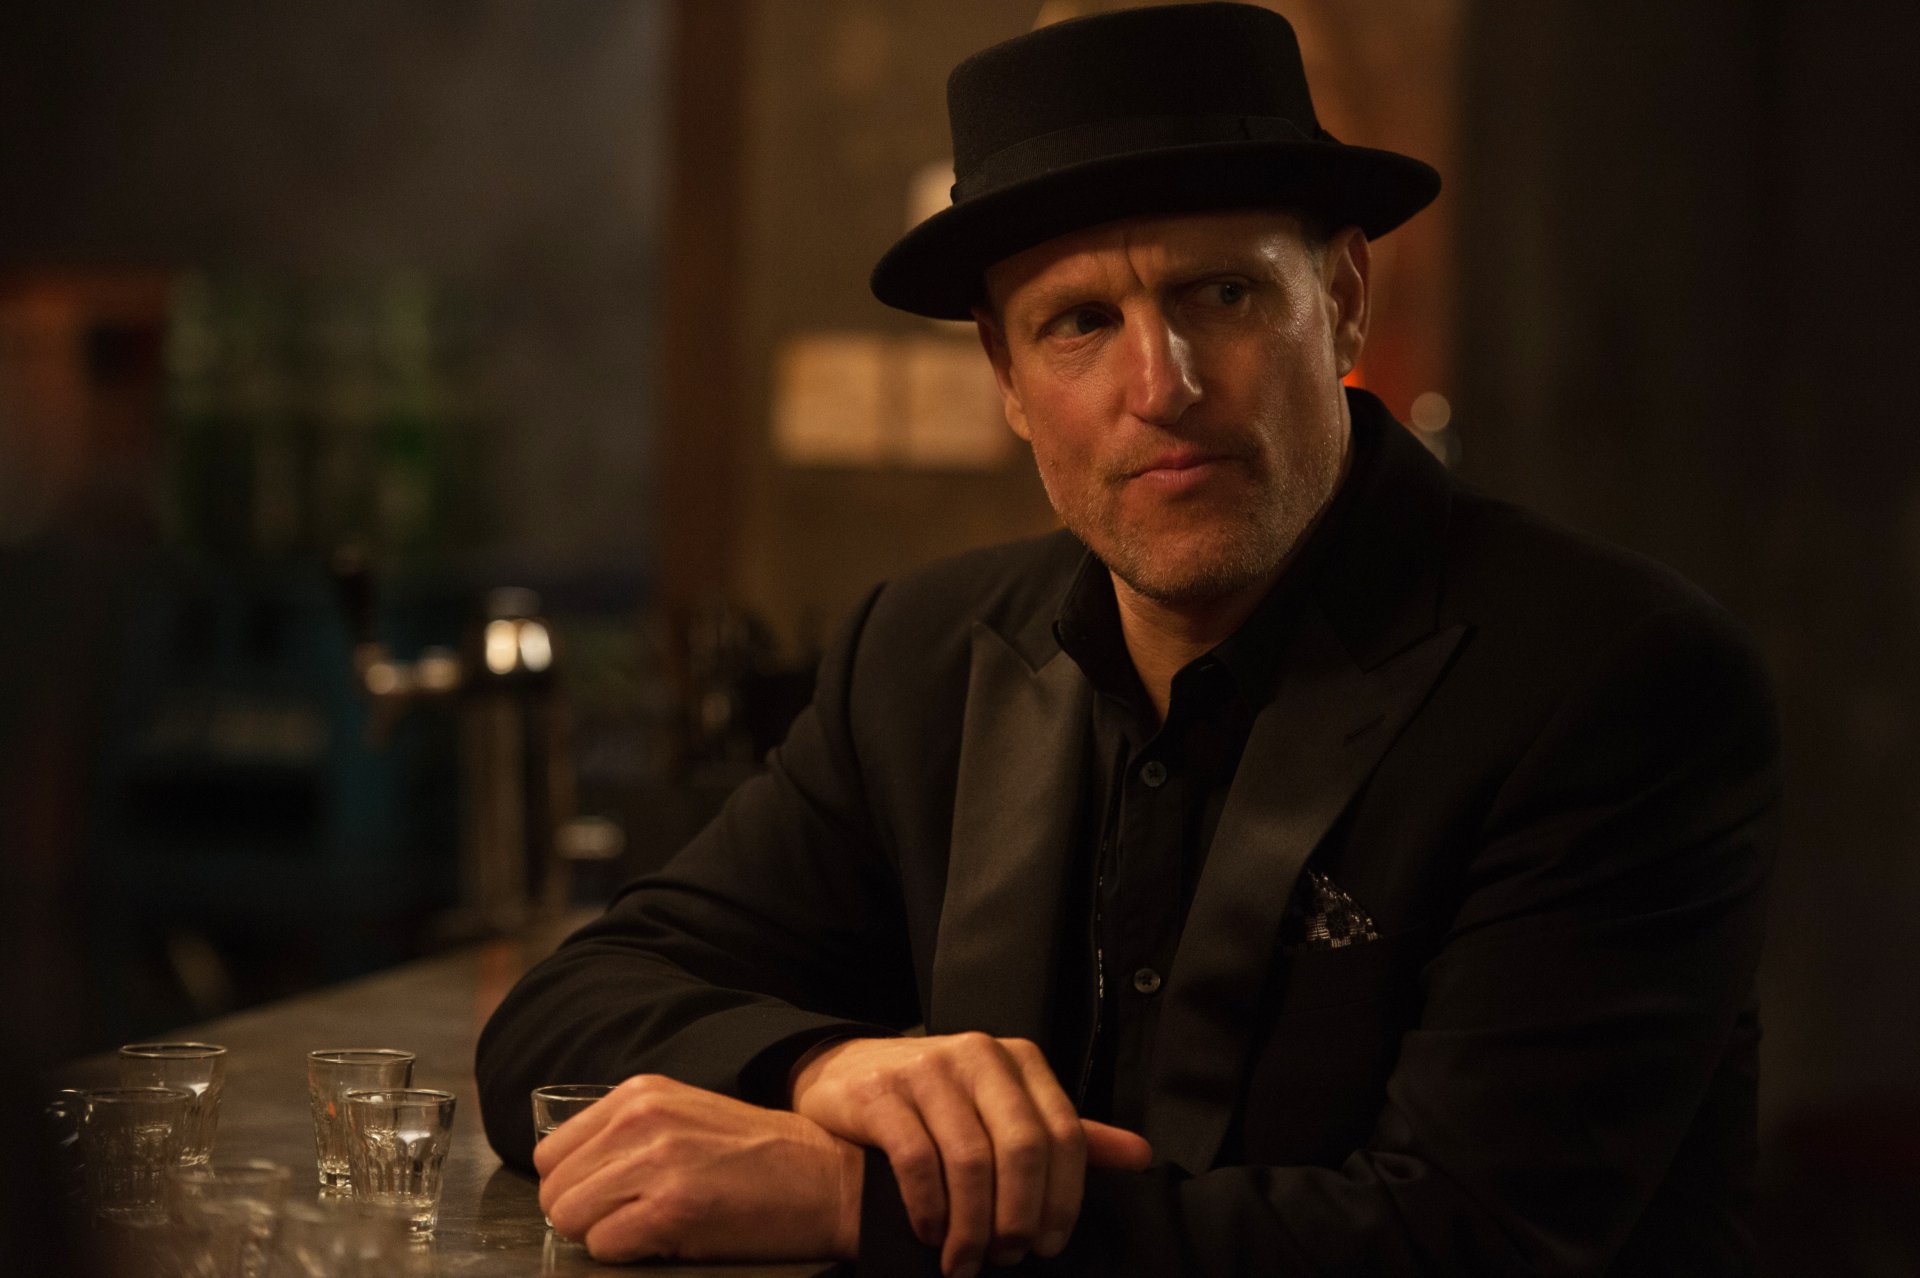 Movie Now You See Me 2 4k Ultra Hd Wallpaper